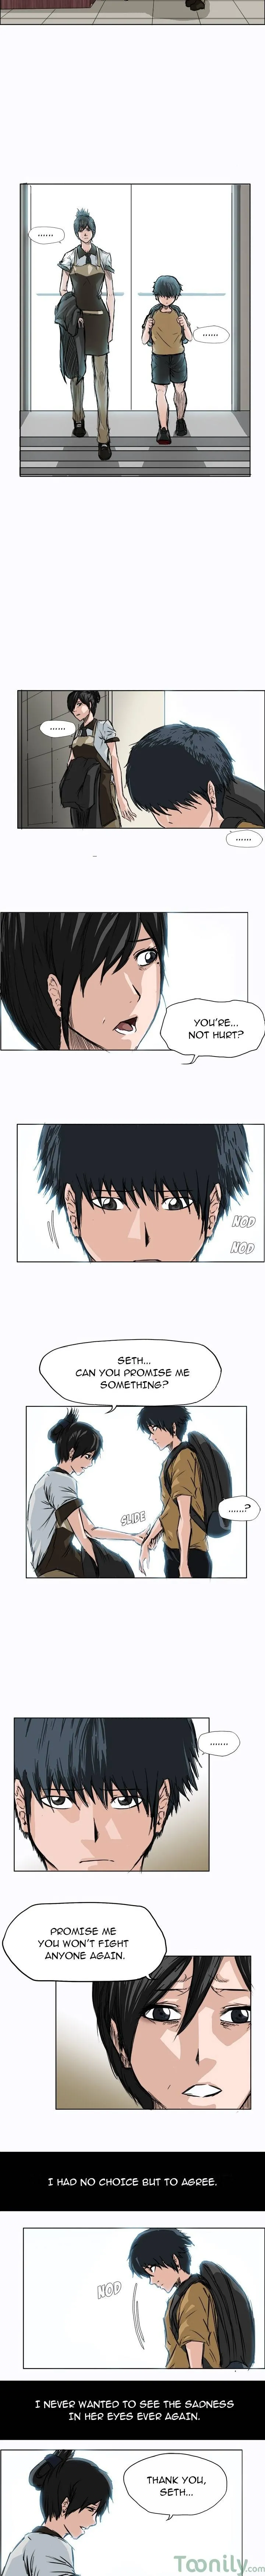 Boss in School Chapter 3 page 5